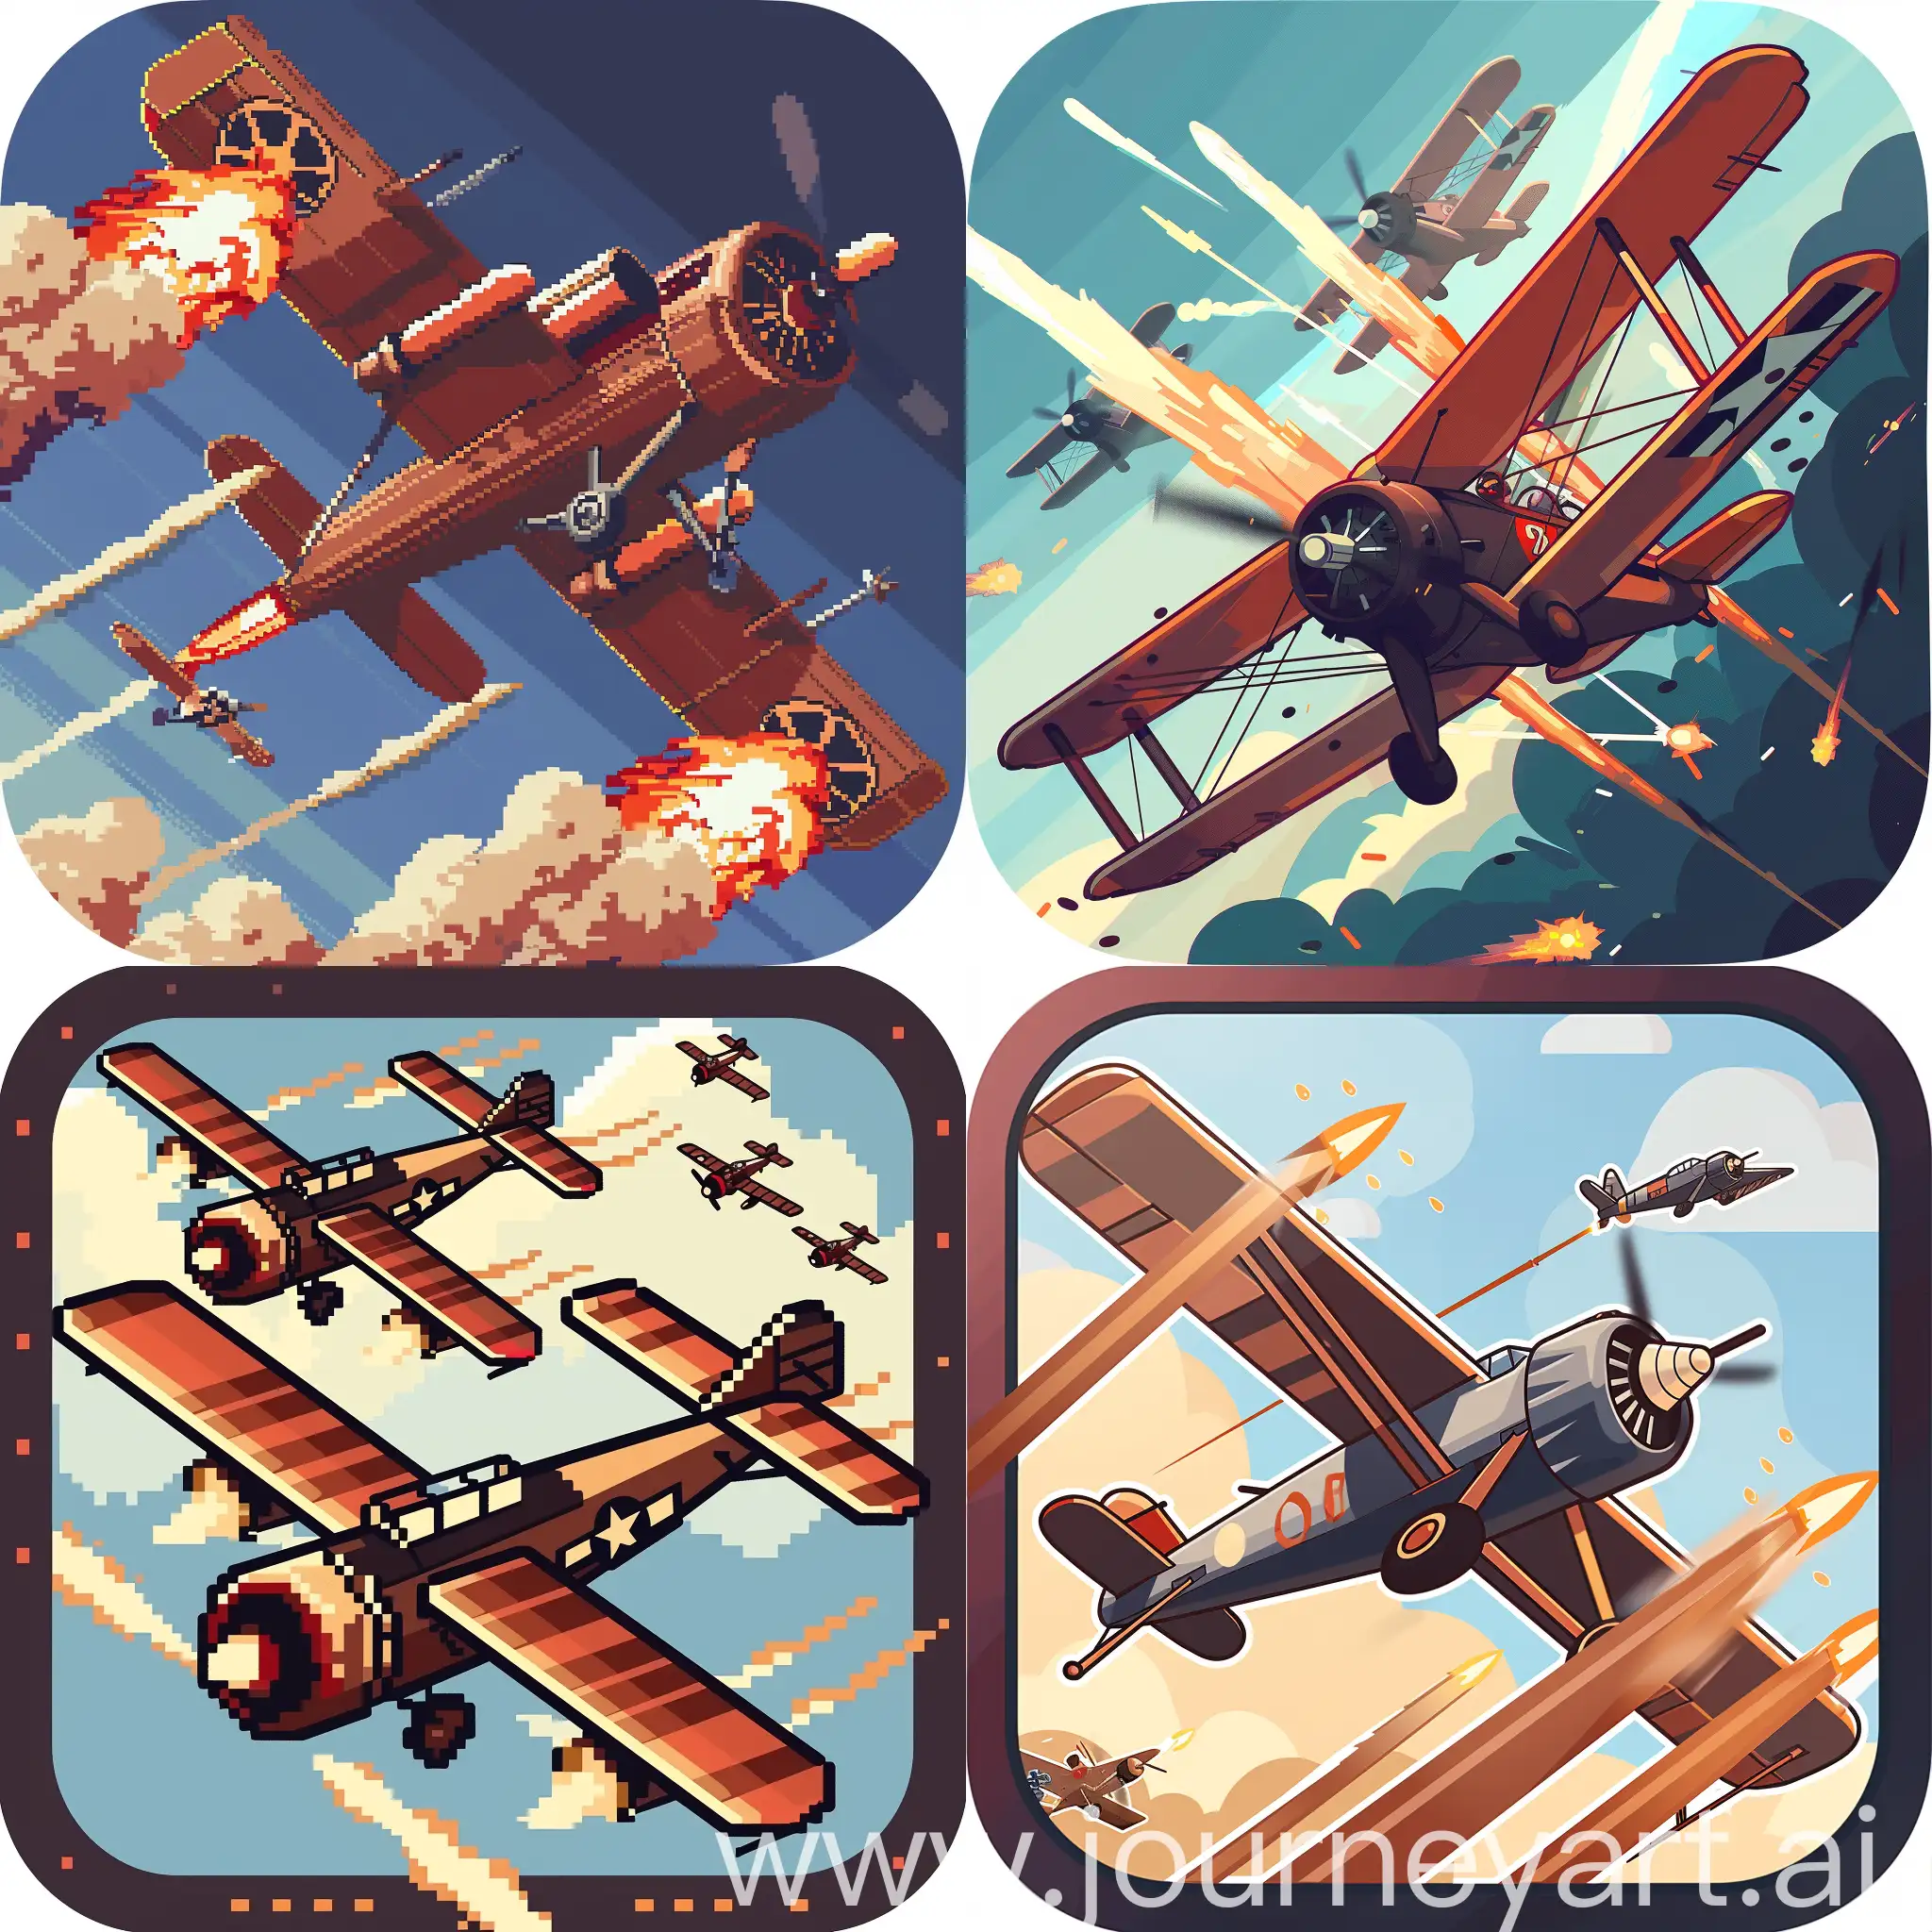 icon for mobile game. Game about fighting on old planes(biplanes). Game is 2d with side-view and pixel art graphics. Icon should express dynamic fighting between planes